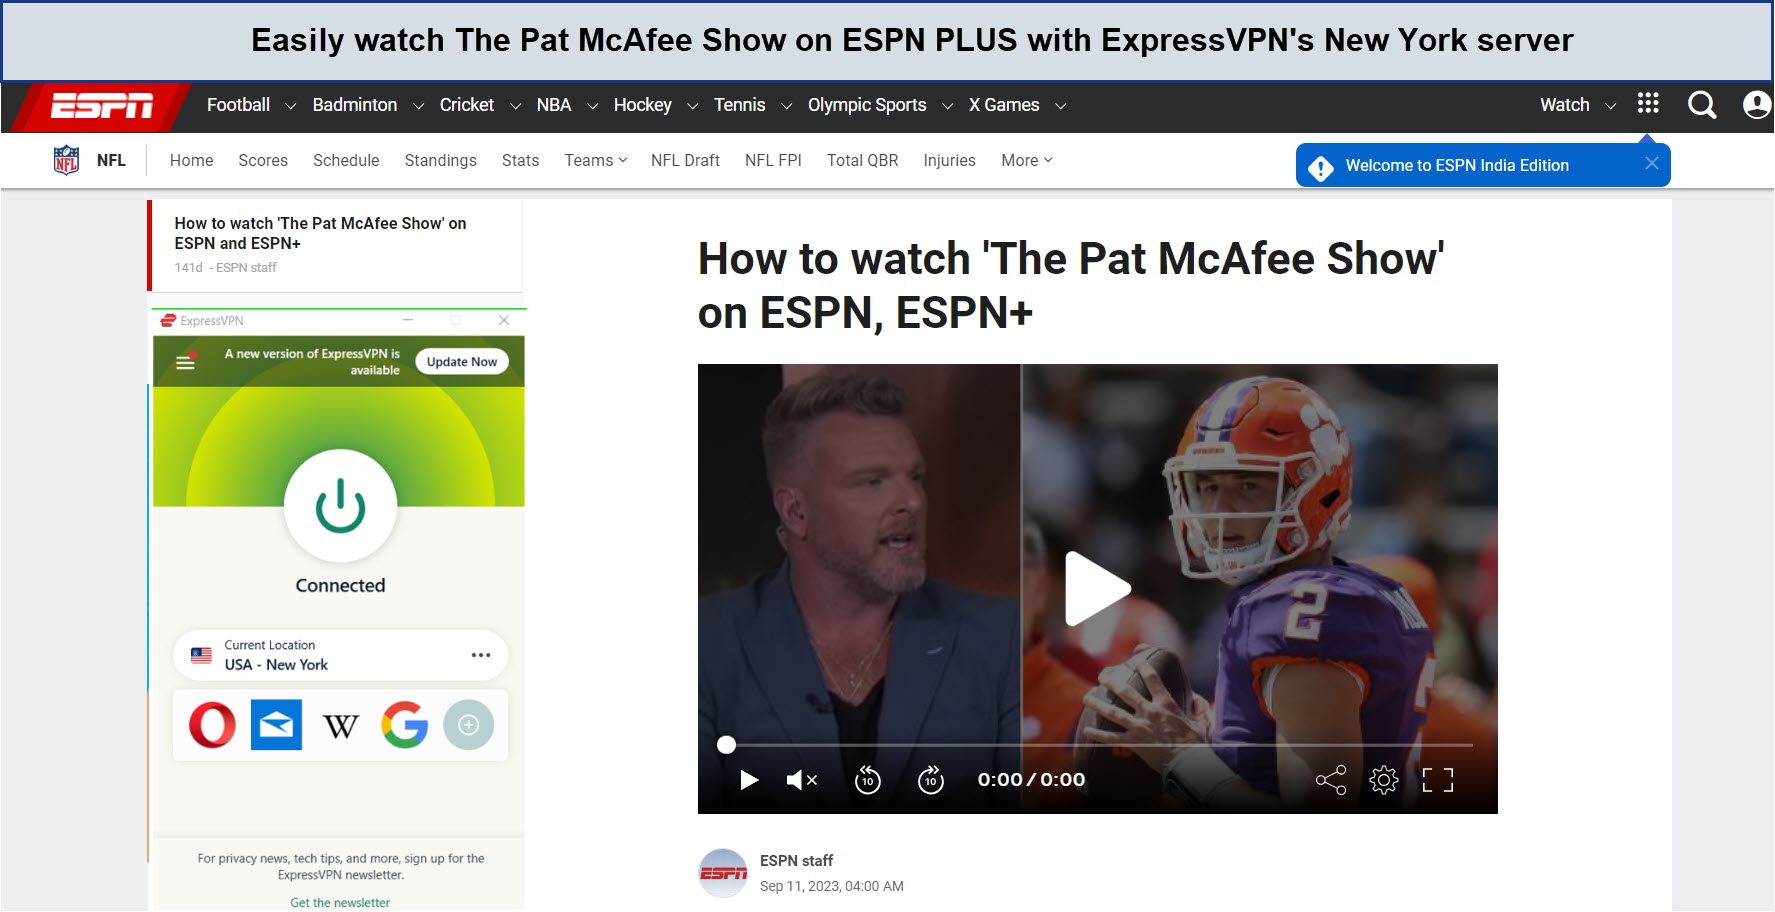 watch-The-Pat-McAfee-Show-on-ESPN-PLUS-with-ExpressVPN-in-Singapore